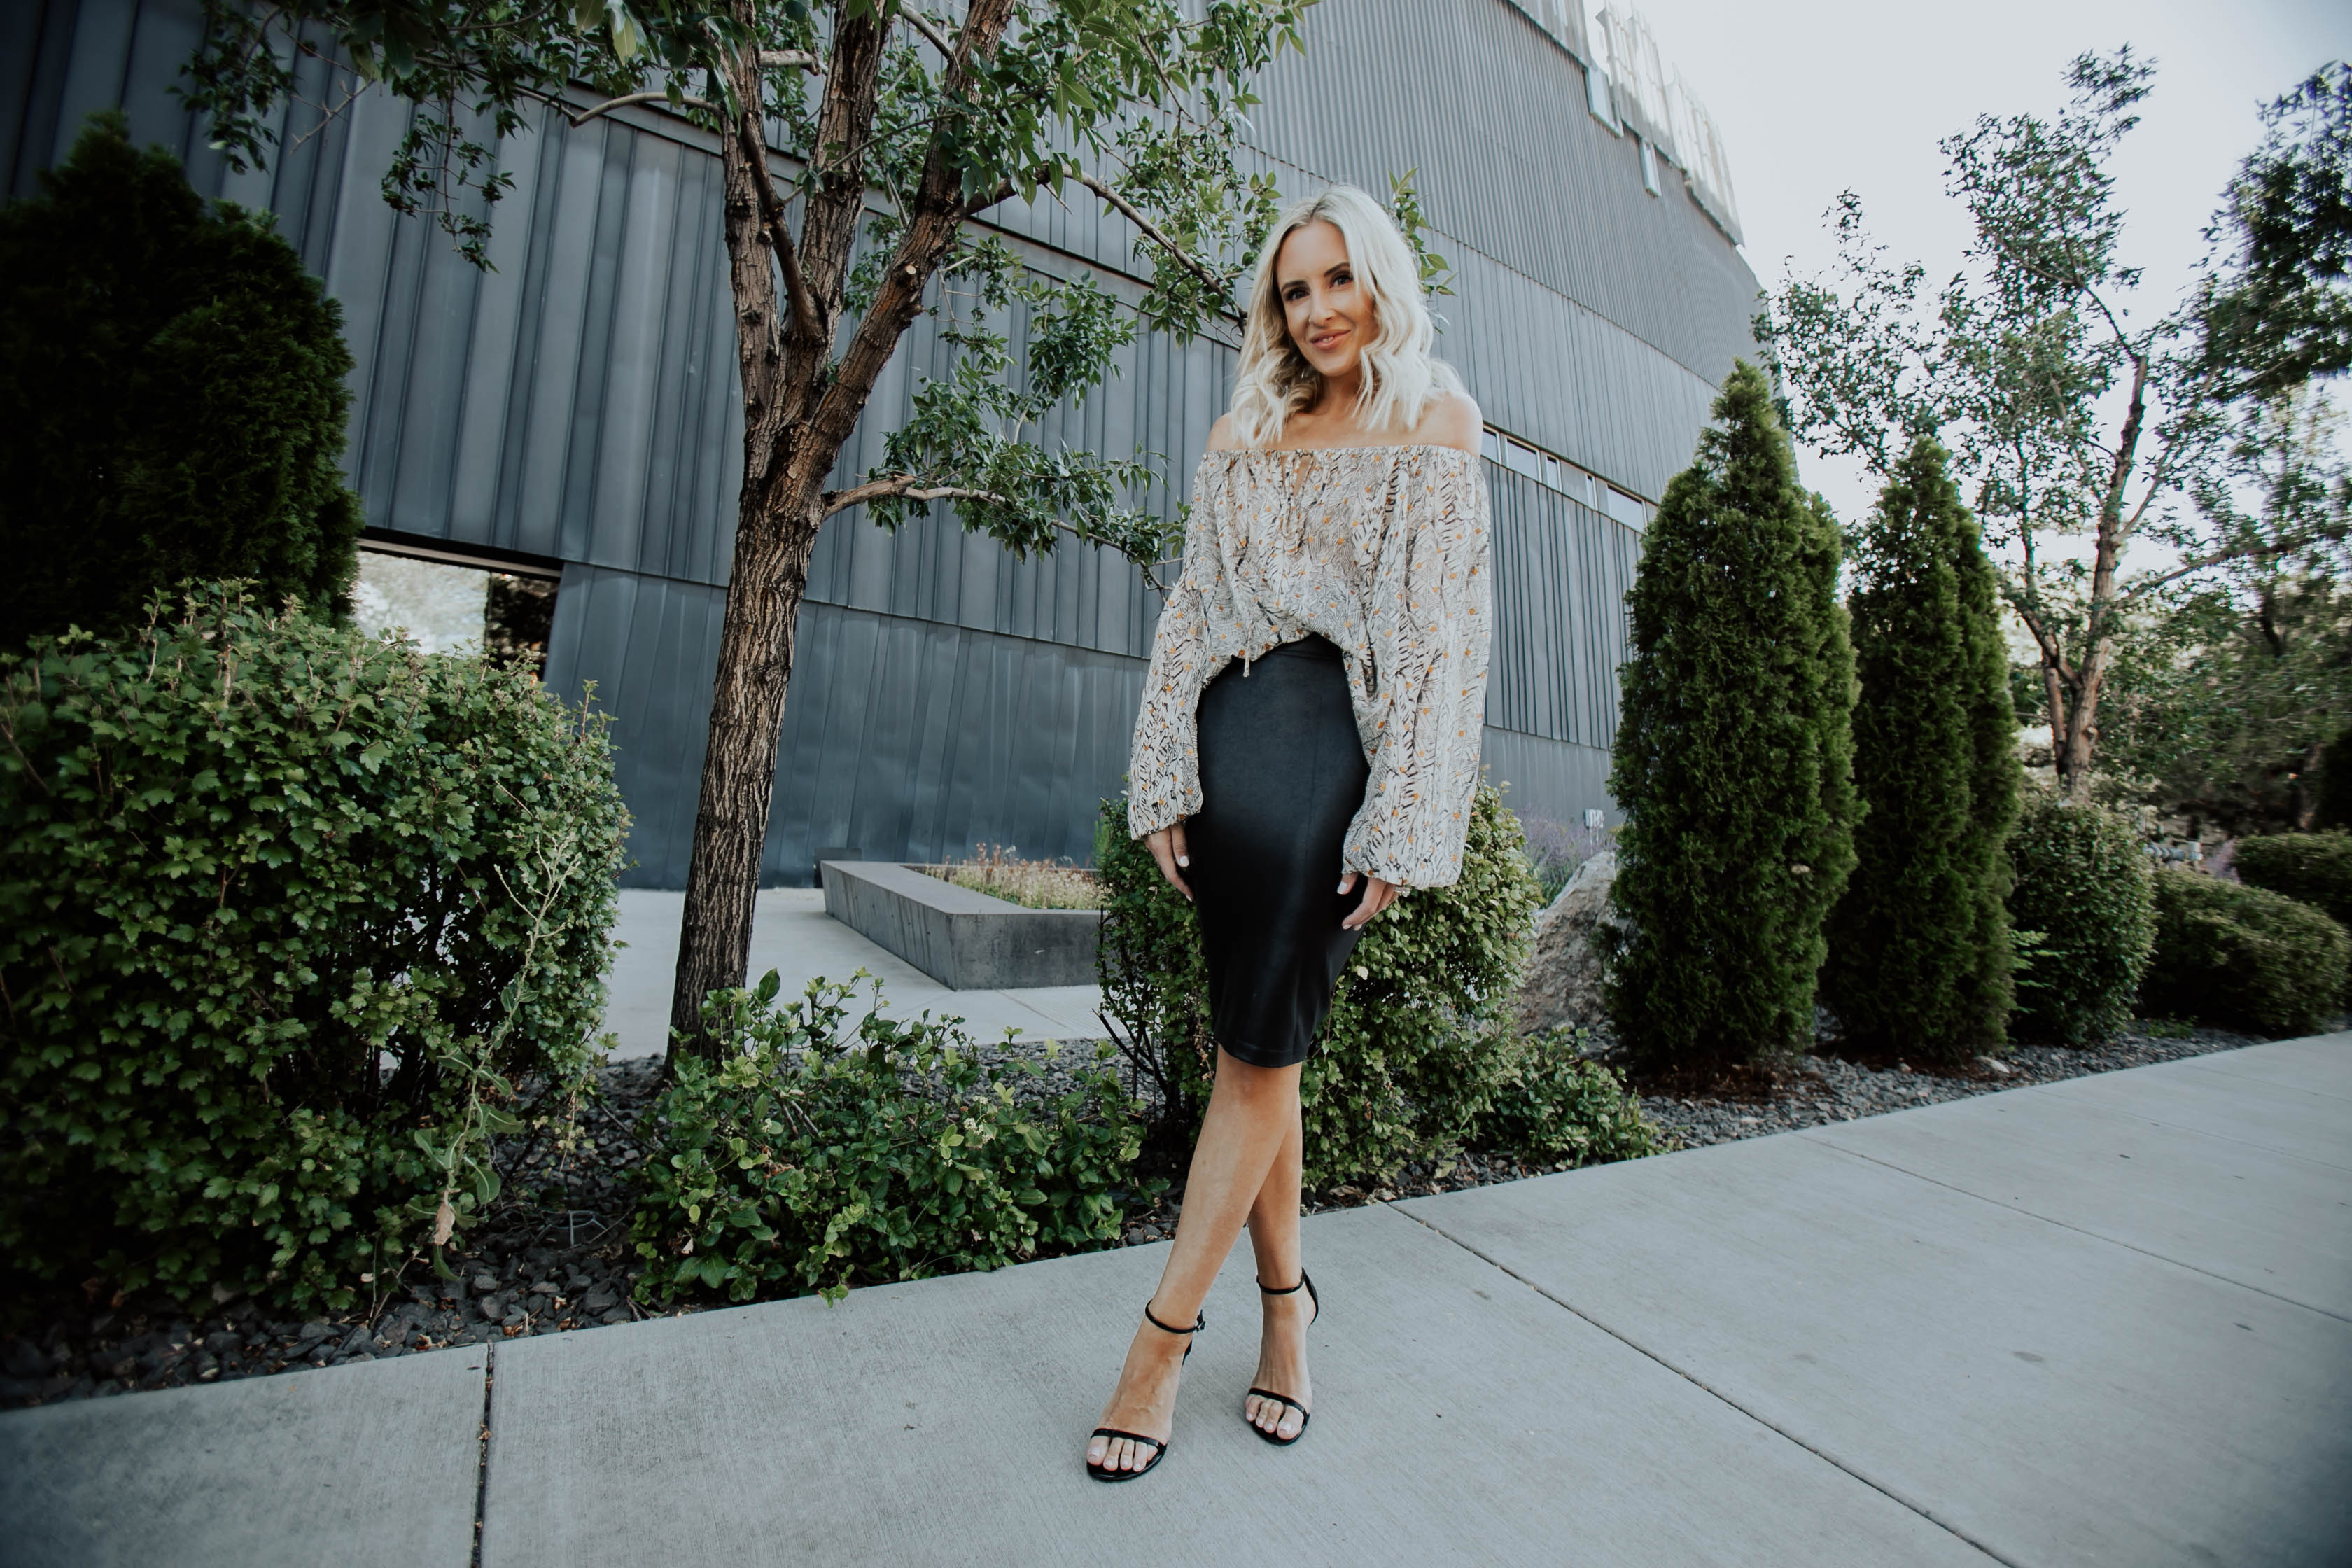 Fashion Bloggers Emily Farren Wieczorek and Ashley Zeal of Two Peas in a Prada talk about their favorite fall looks from Trendsend with Evereve!